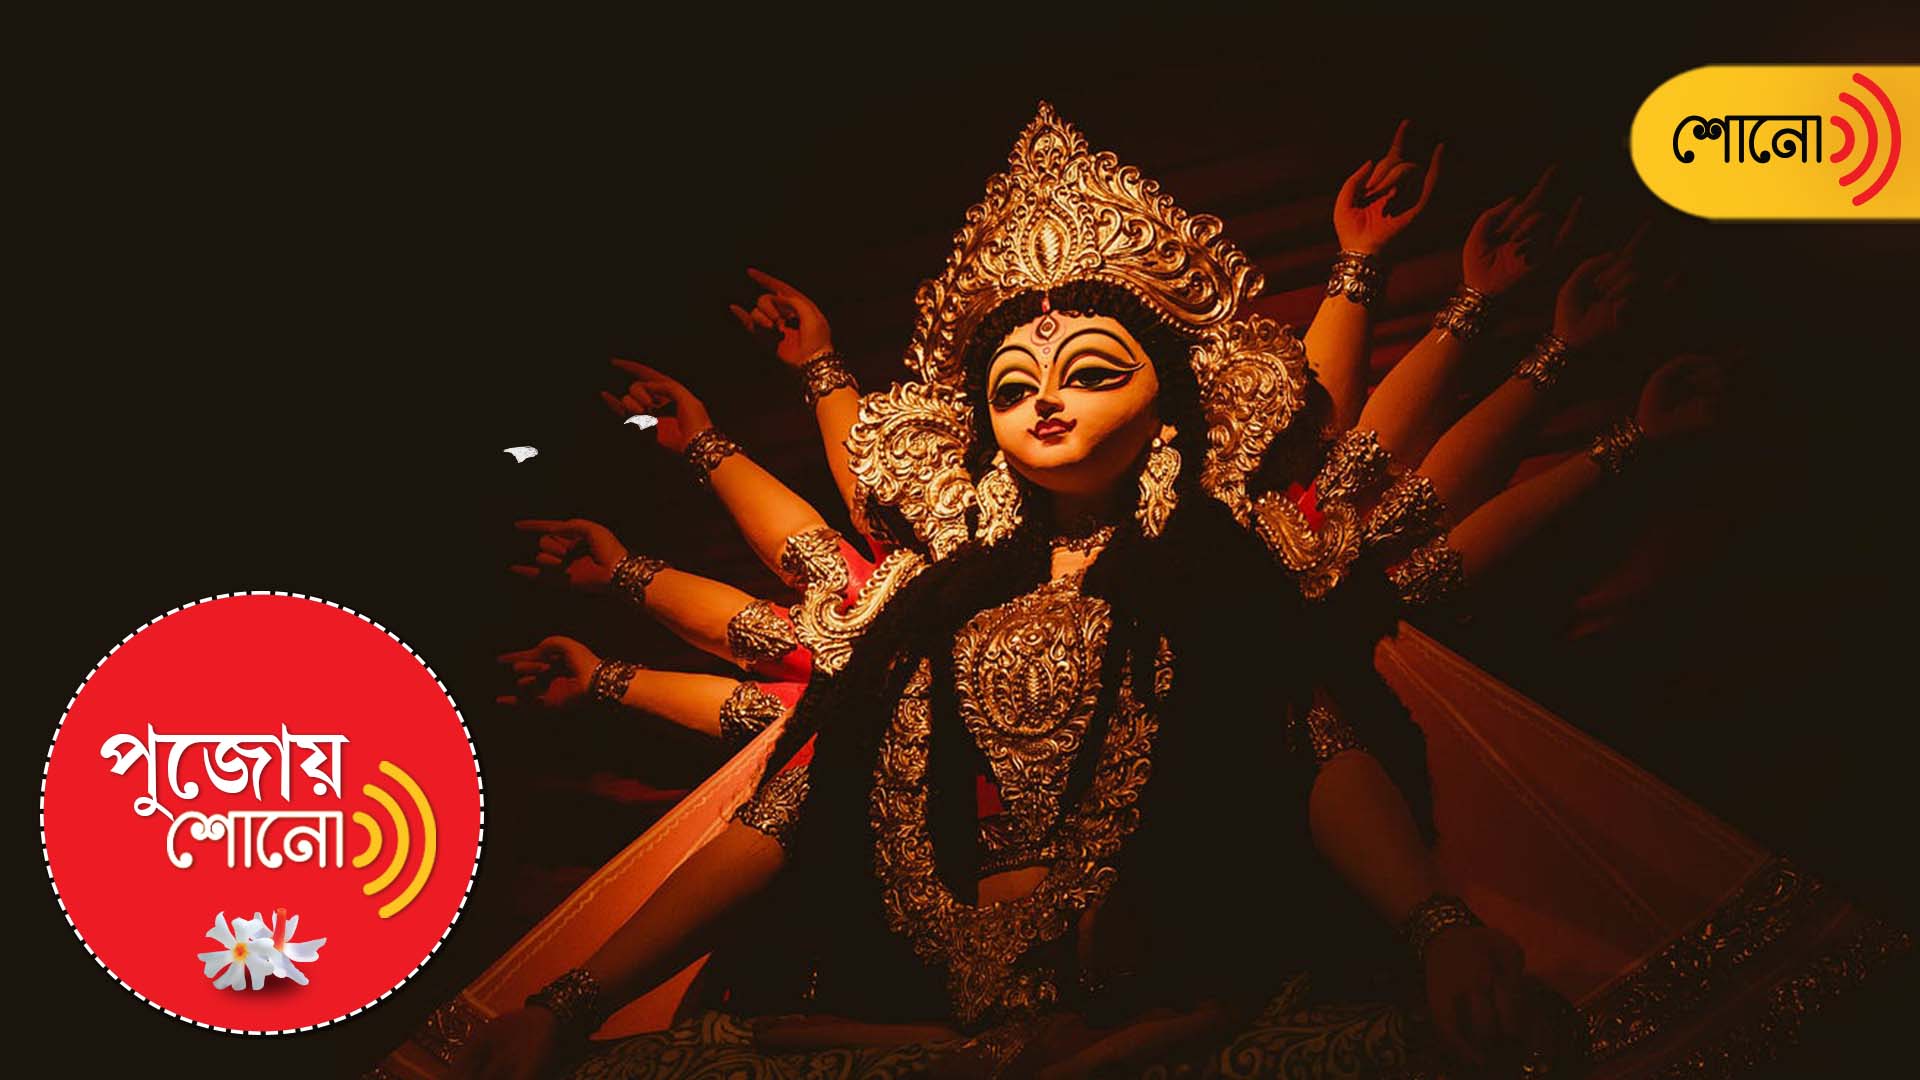 a play of lottery was organised to arrange the expenses for a Durga Puja